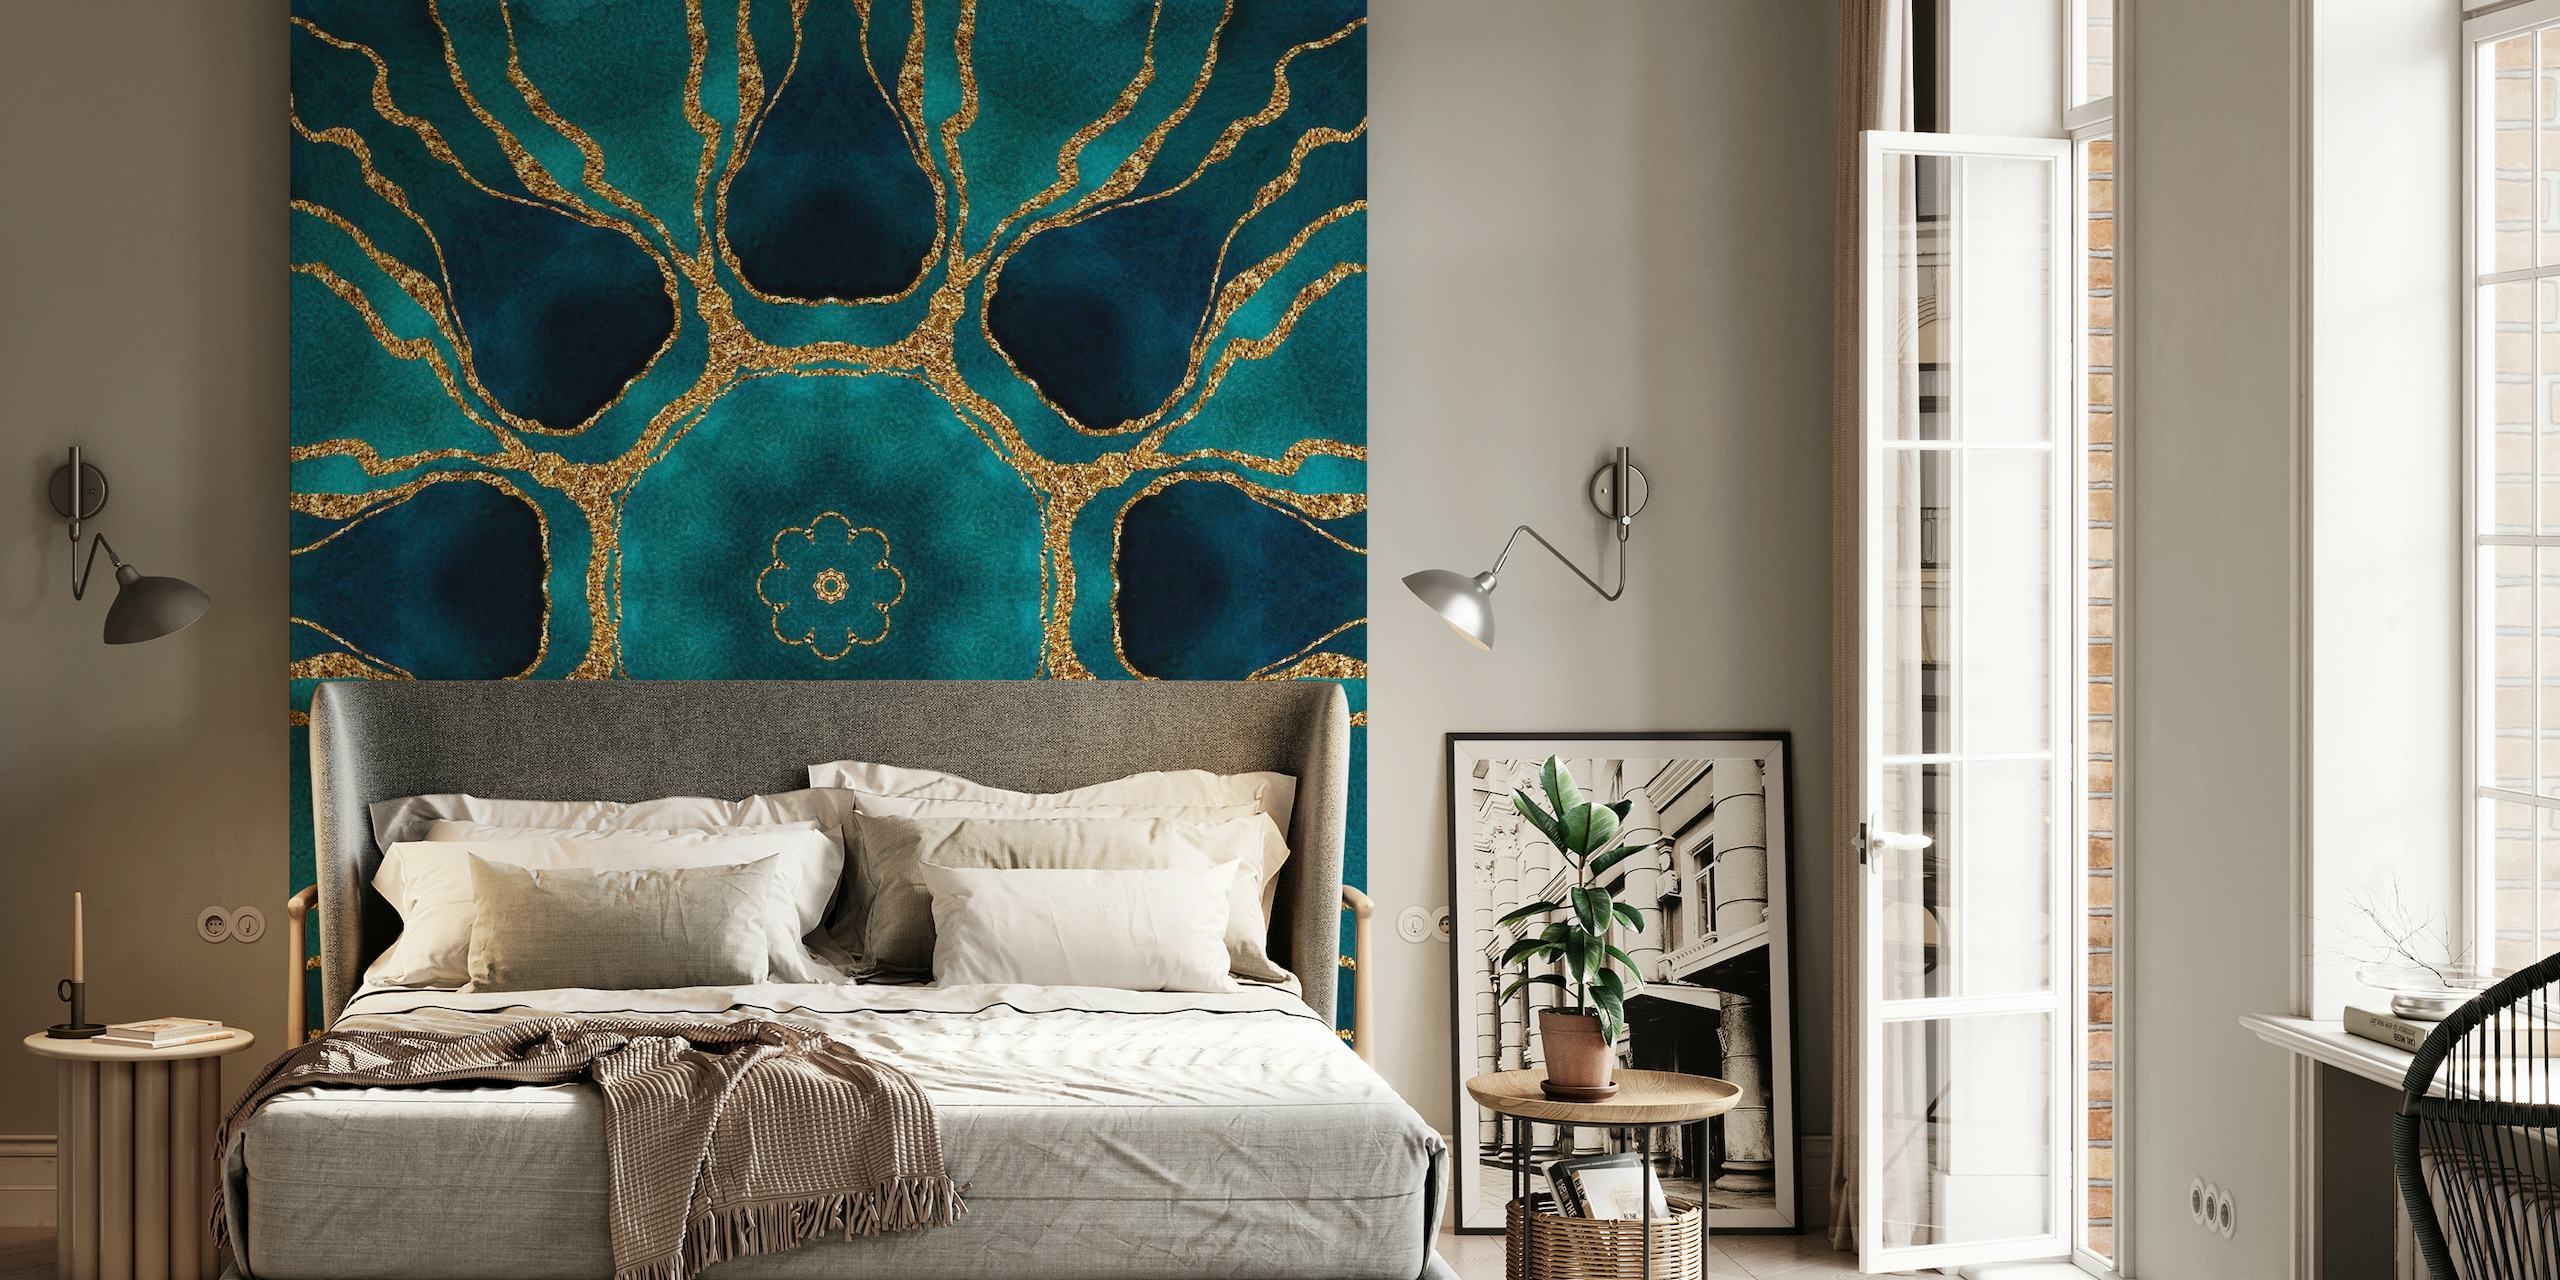 Turquoise Gold Marble Tiles 3 behang